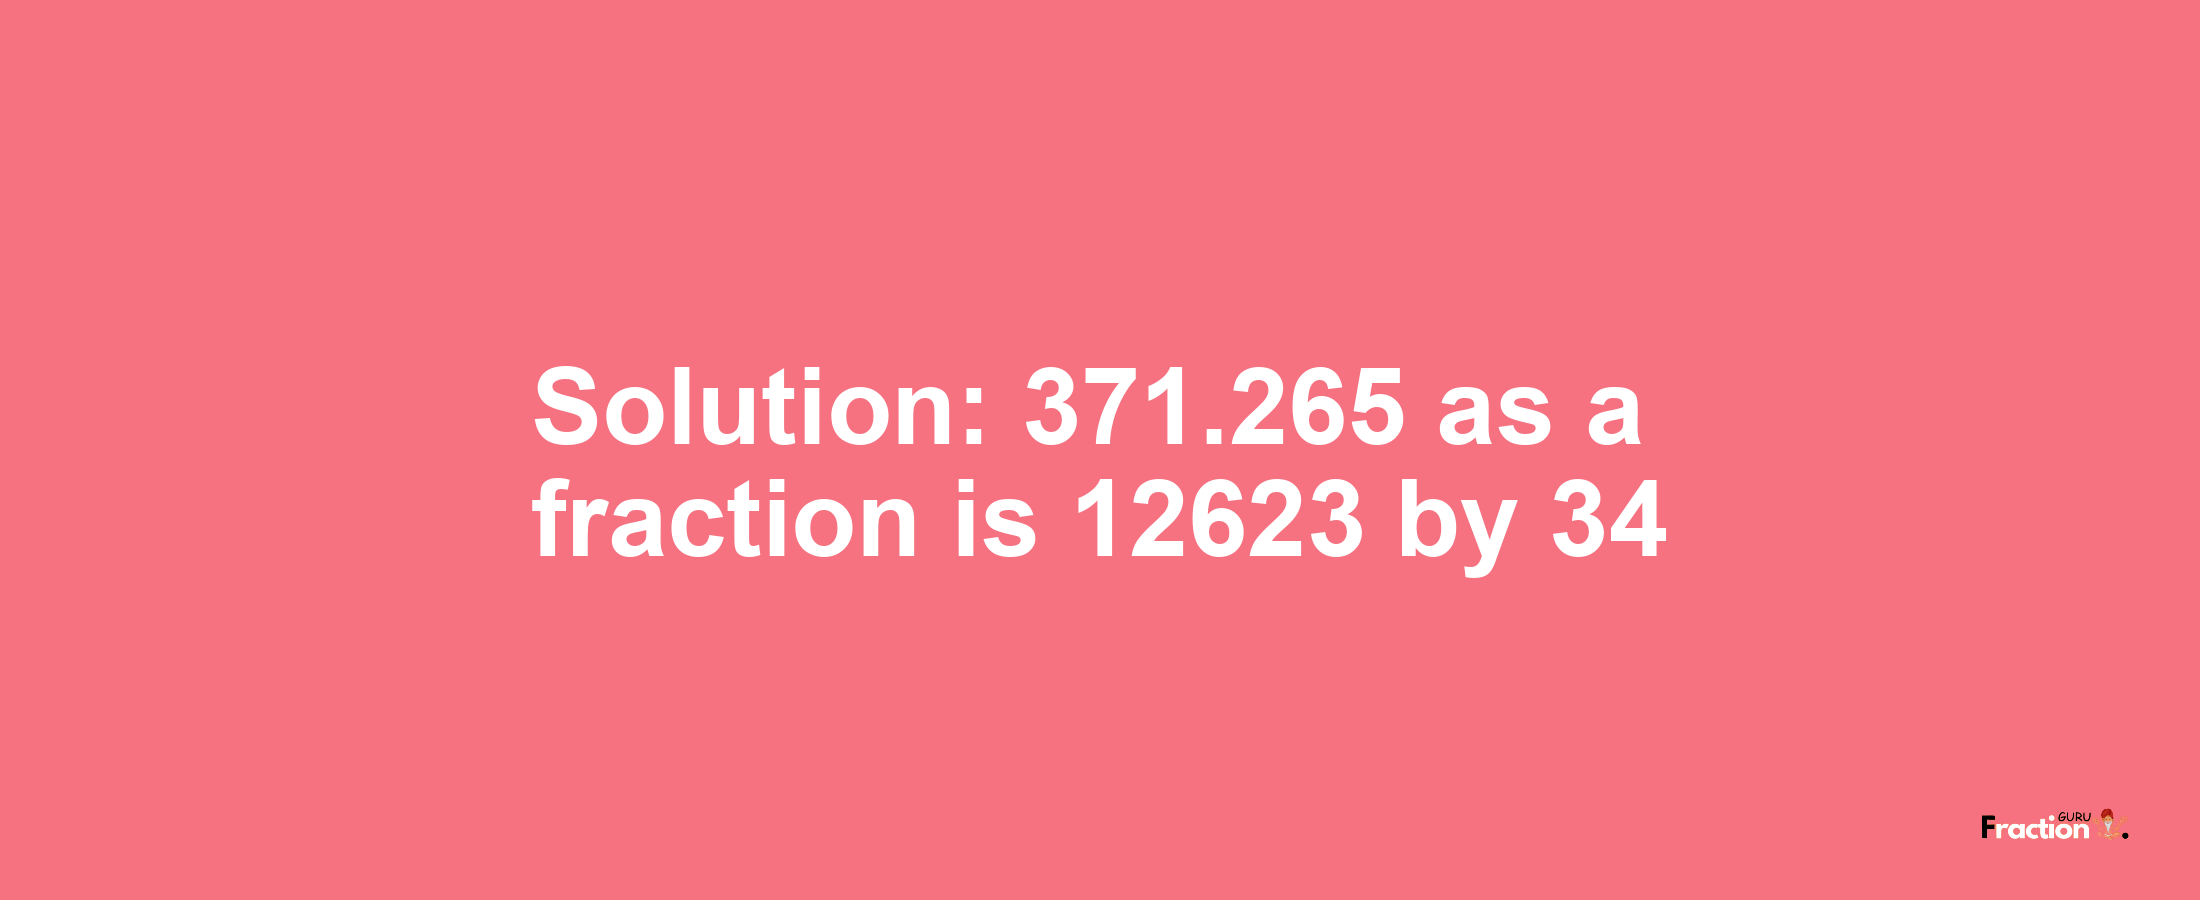 Solution:371.265 as a fraction is 12623/34